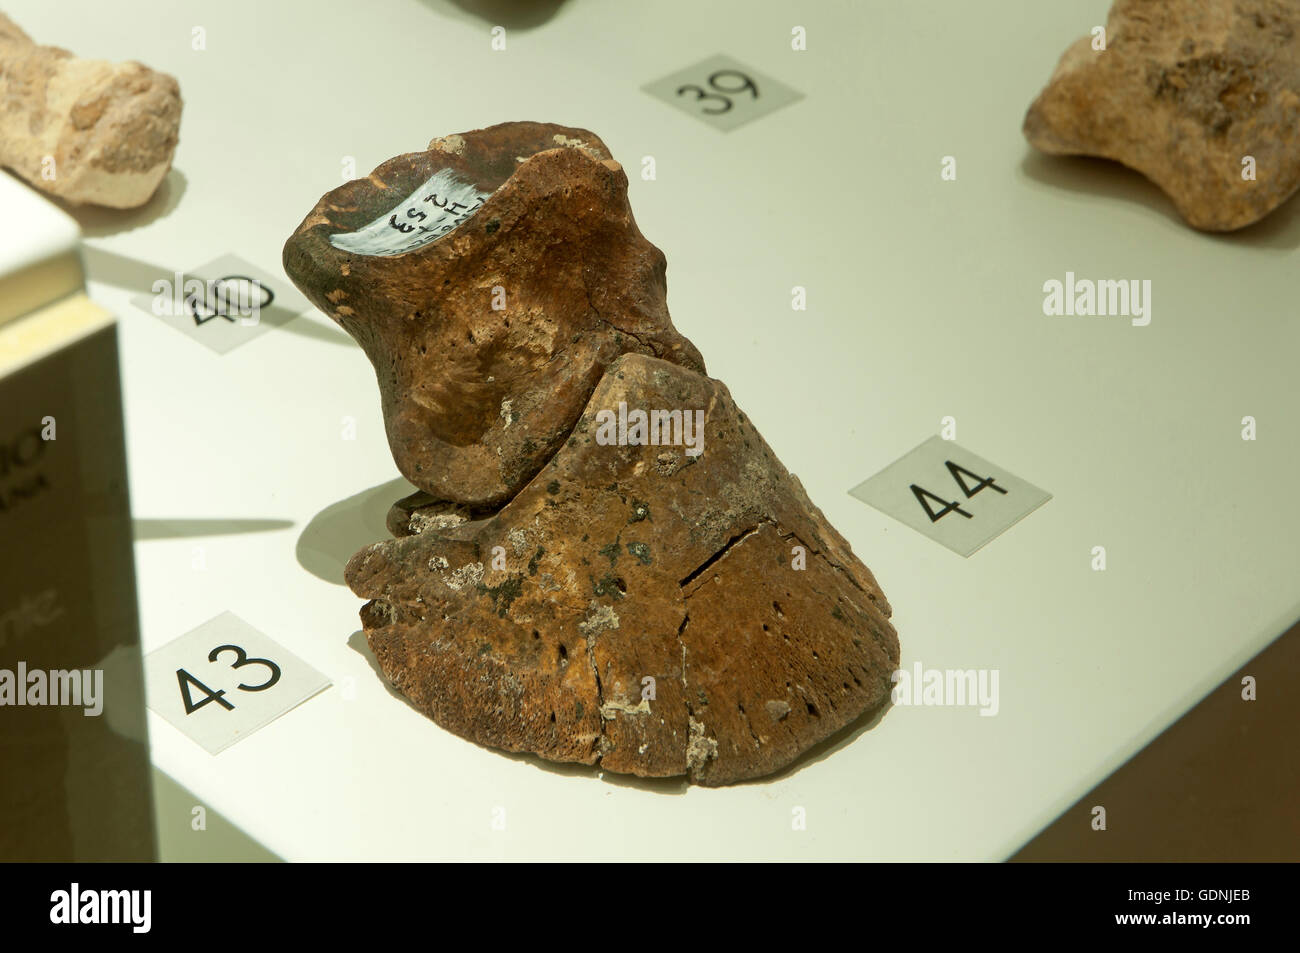 Exhibition of remains found in the Cueva del Angel chasm, Condes de Santa Ana Palace, Lucena, Cordoba province, Spain, Europe Stock Photo